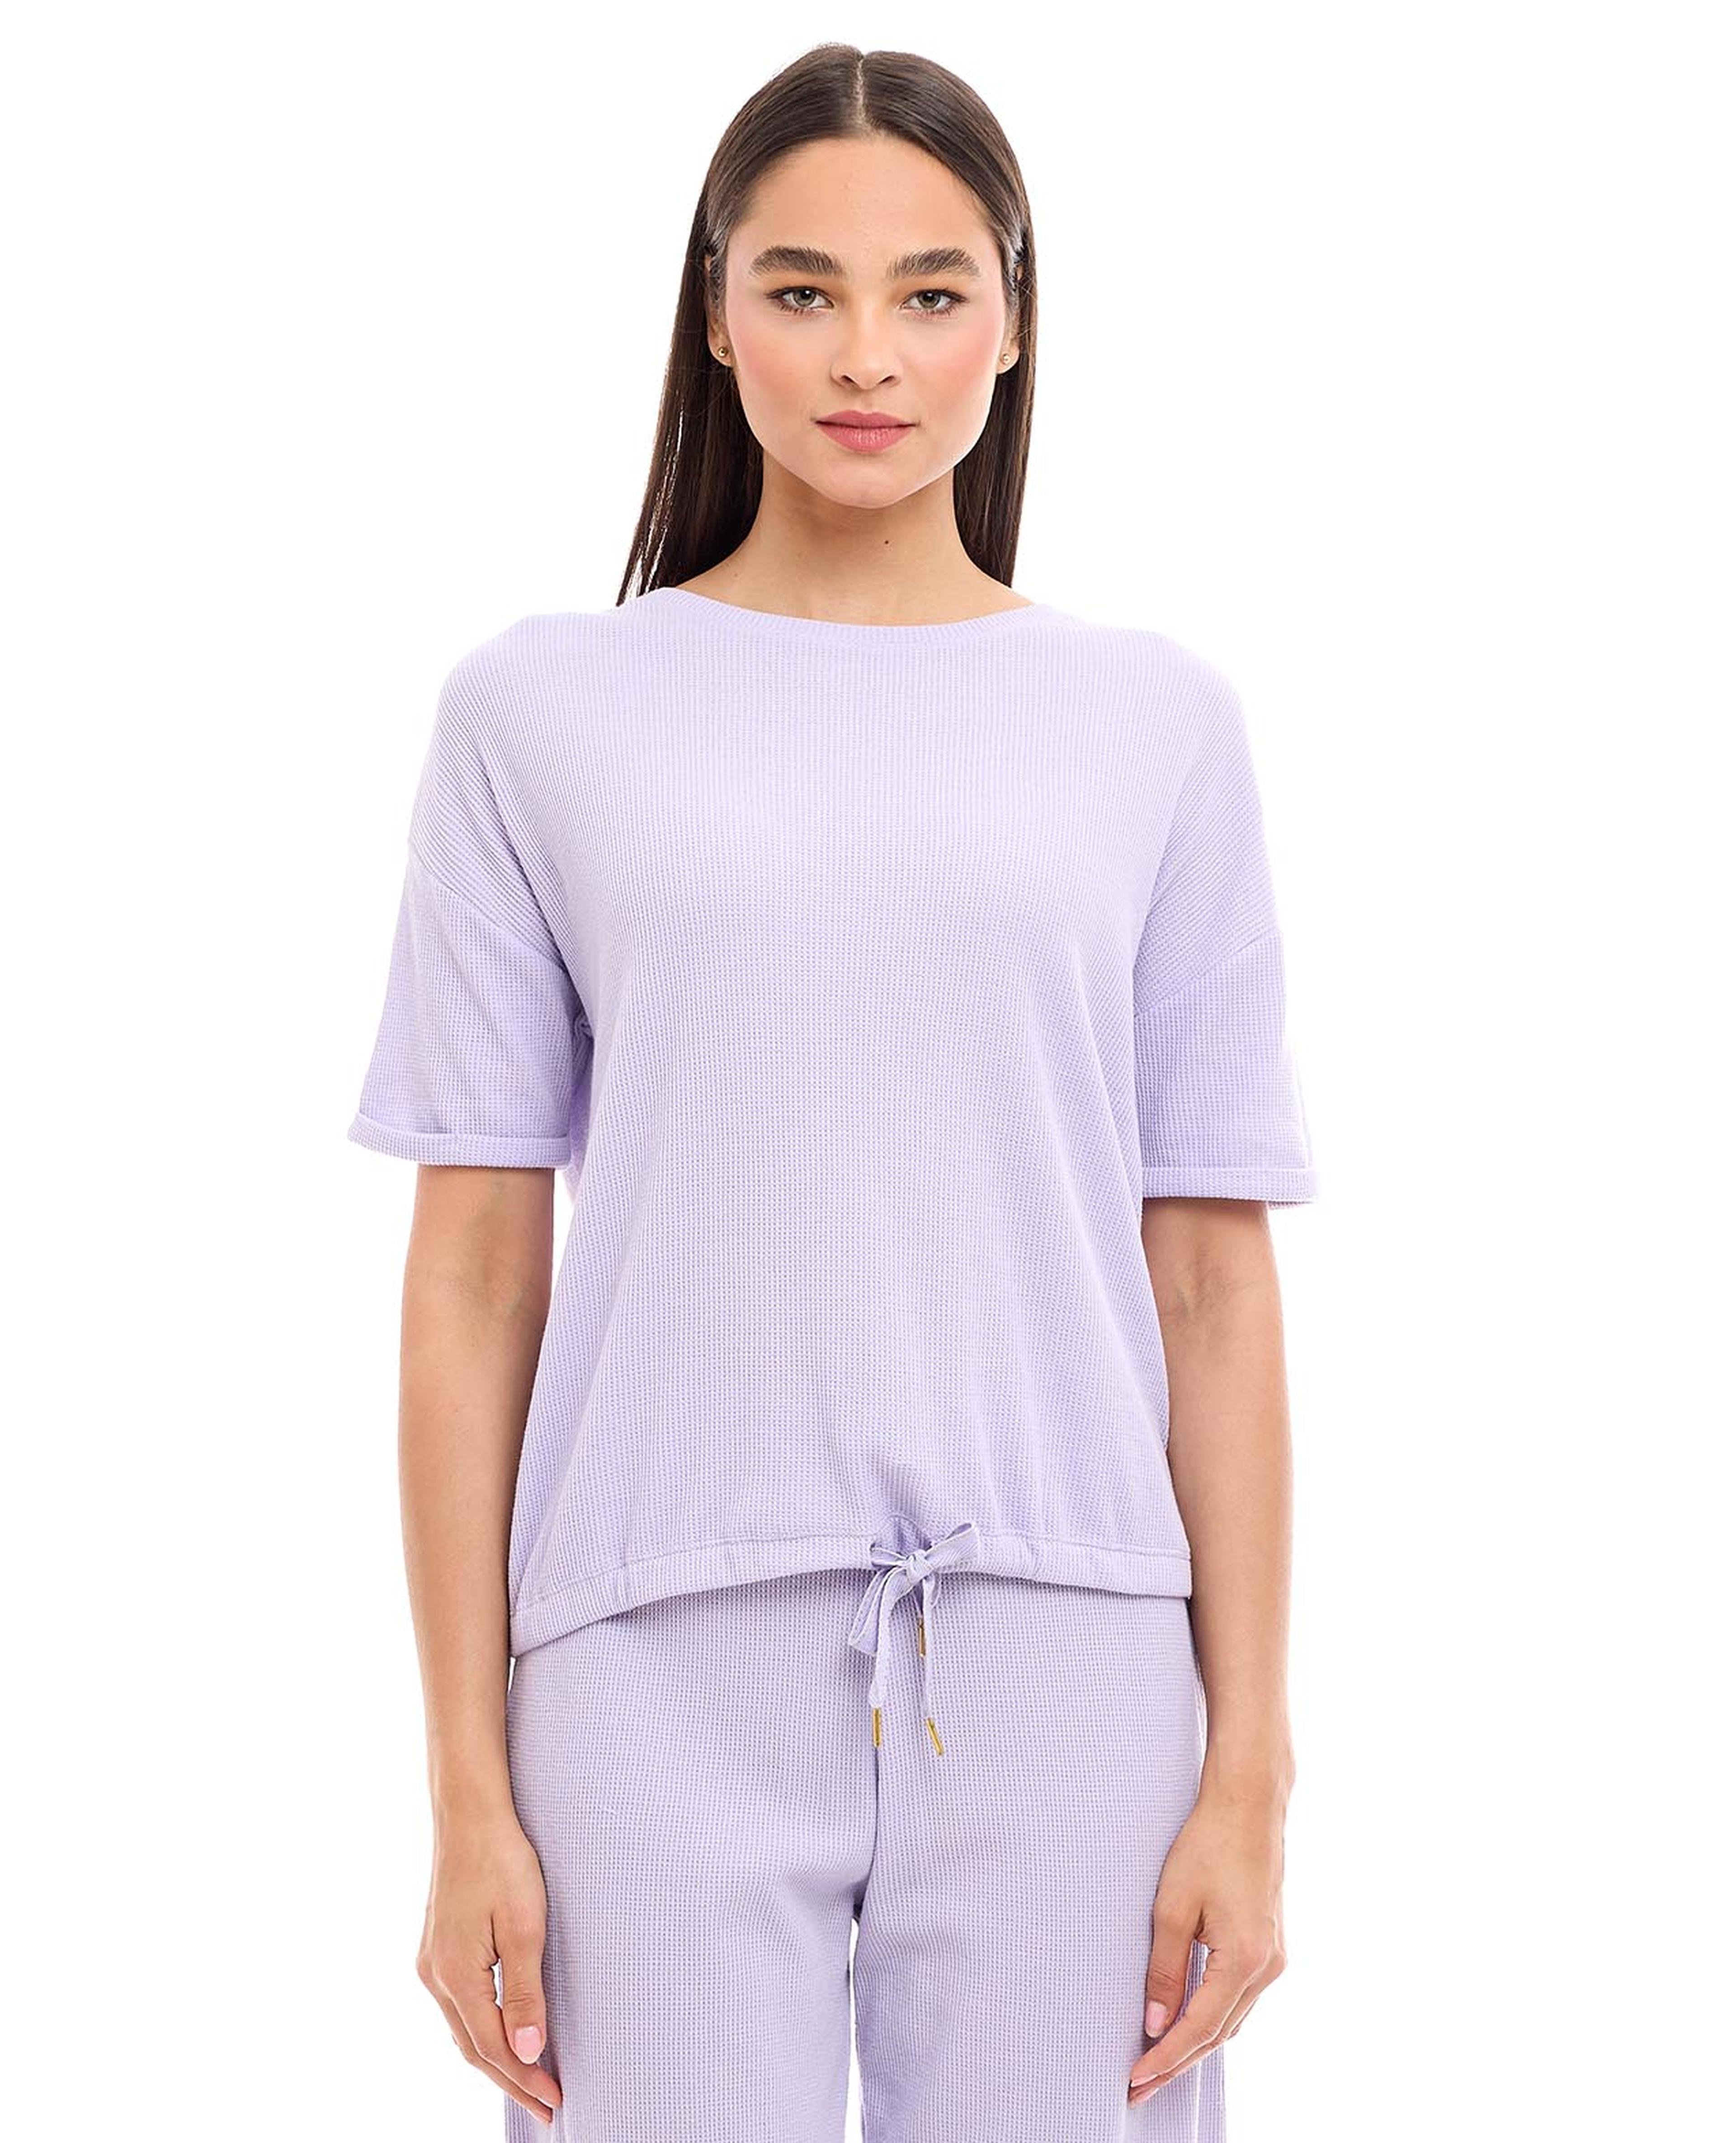 Textured Sleep Top with Crew Neck and Short Sleeves